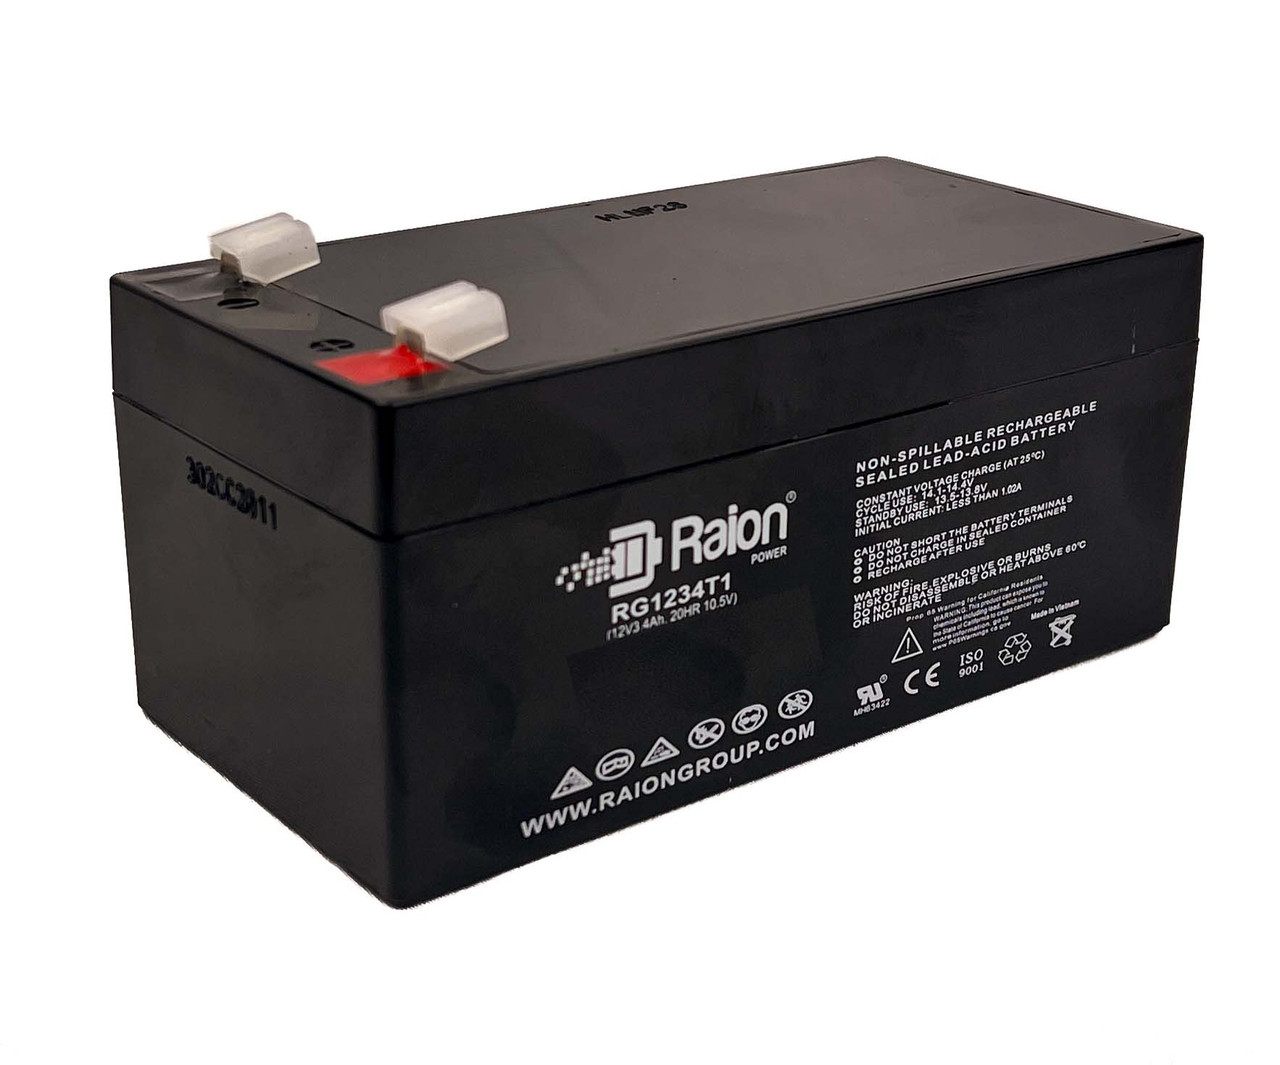 Raion Power 12V 3.4Ah Non-Spillable Replacement Battery for Criticare Systems 1100 Poet Monitor